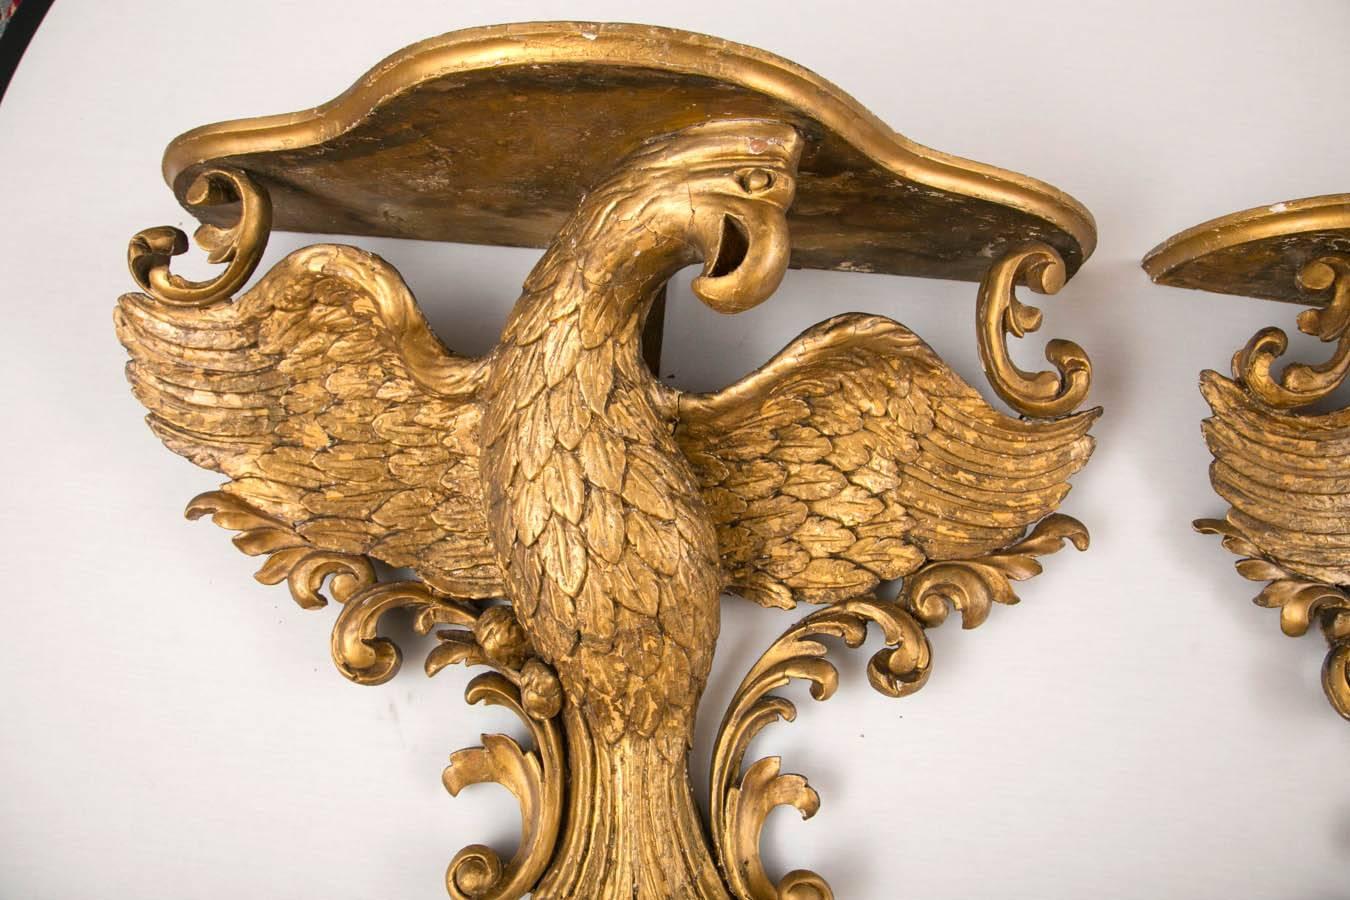 Pair of gilt-gesso and wood-carved eagle-form wall brackets, the shaped and molded shelves above spread wing eagles in opposing stances on acanthus volutes, America, mid-late 19th century. Measures: 23 inches high by 30 inches wide by 12 inches deep